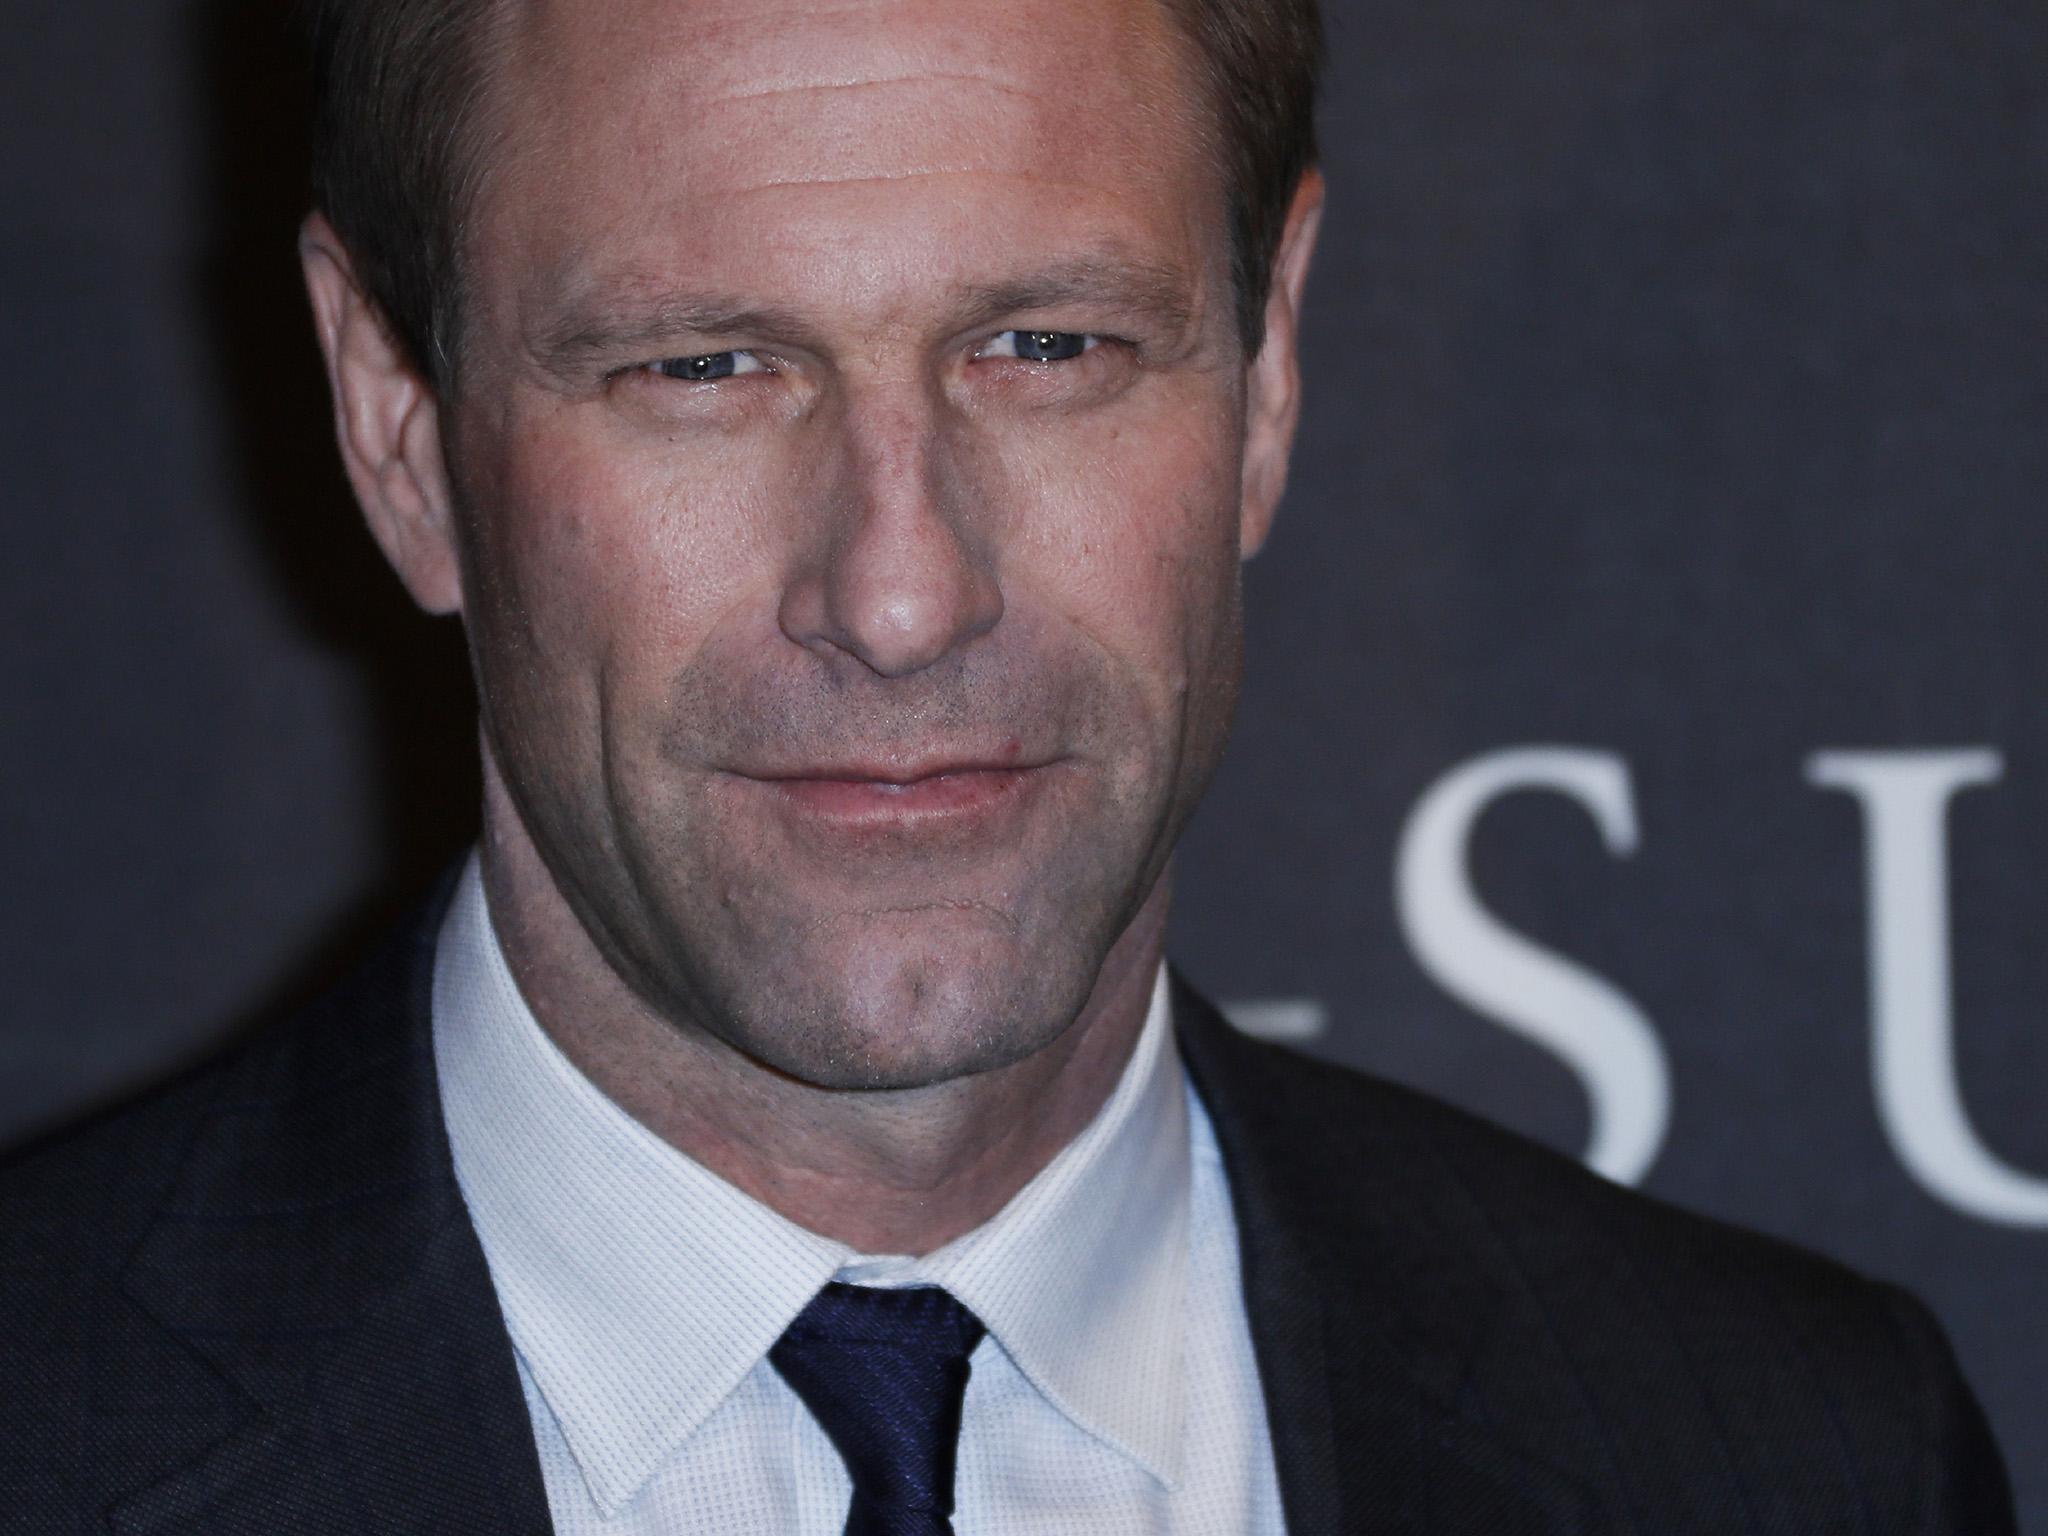 Aaron Eckhart poses during the photocall of US director Clint Eastwood's latest movie 'Sully' in Paris